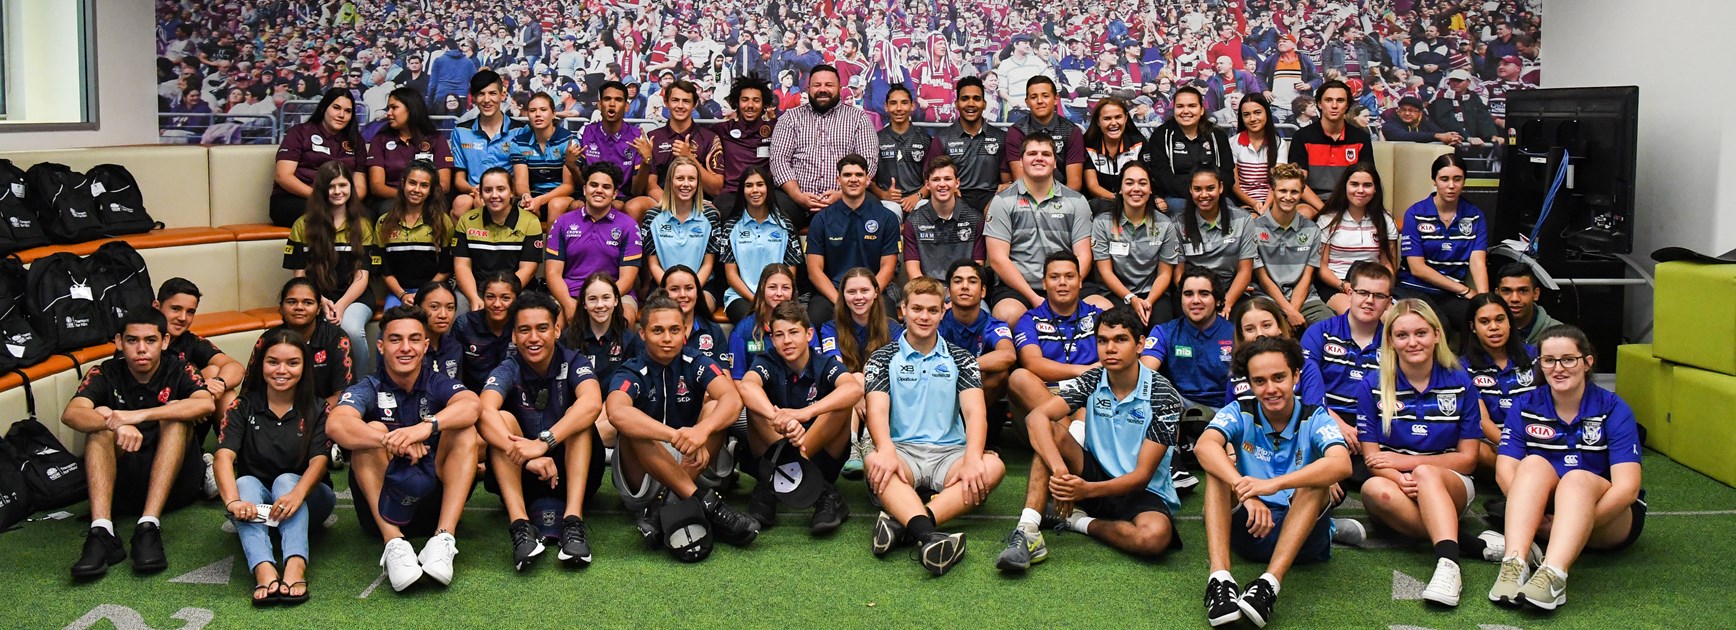 The 2018 Youth Summit at the Festival of Indigenous Rugby League.
